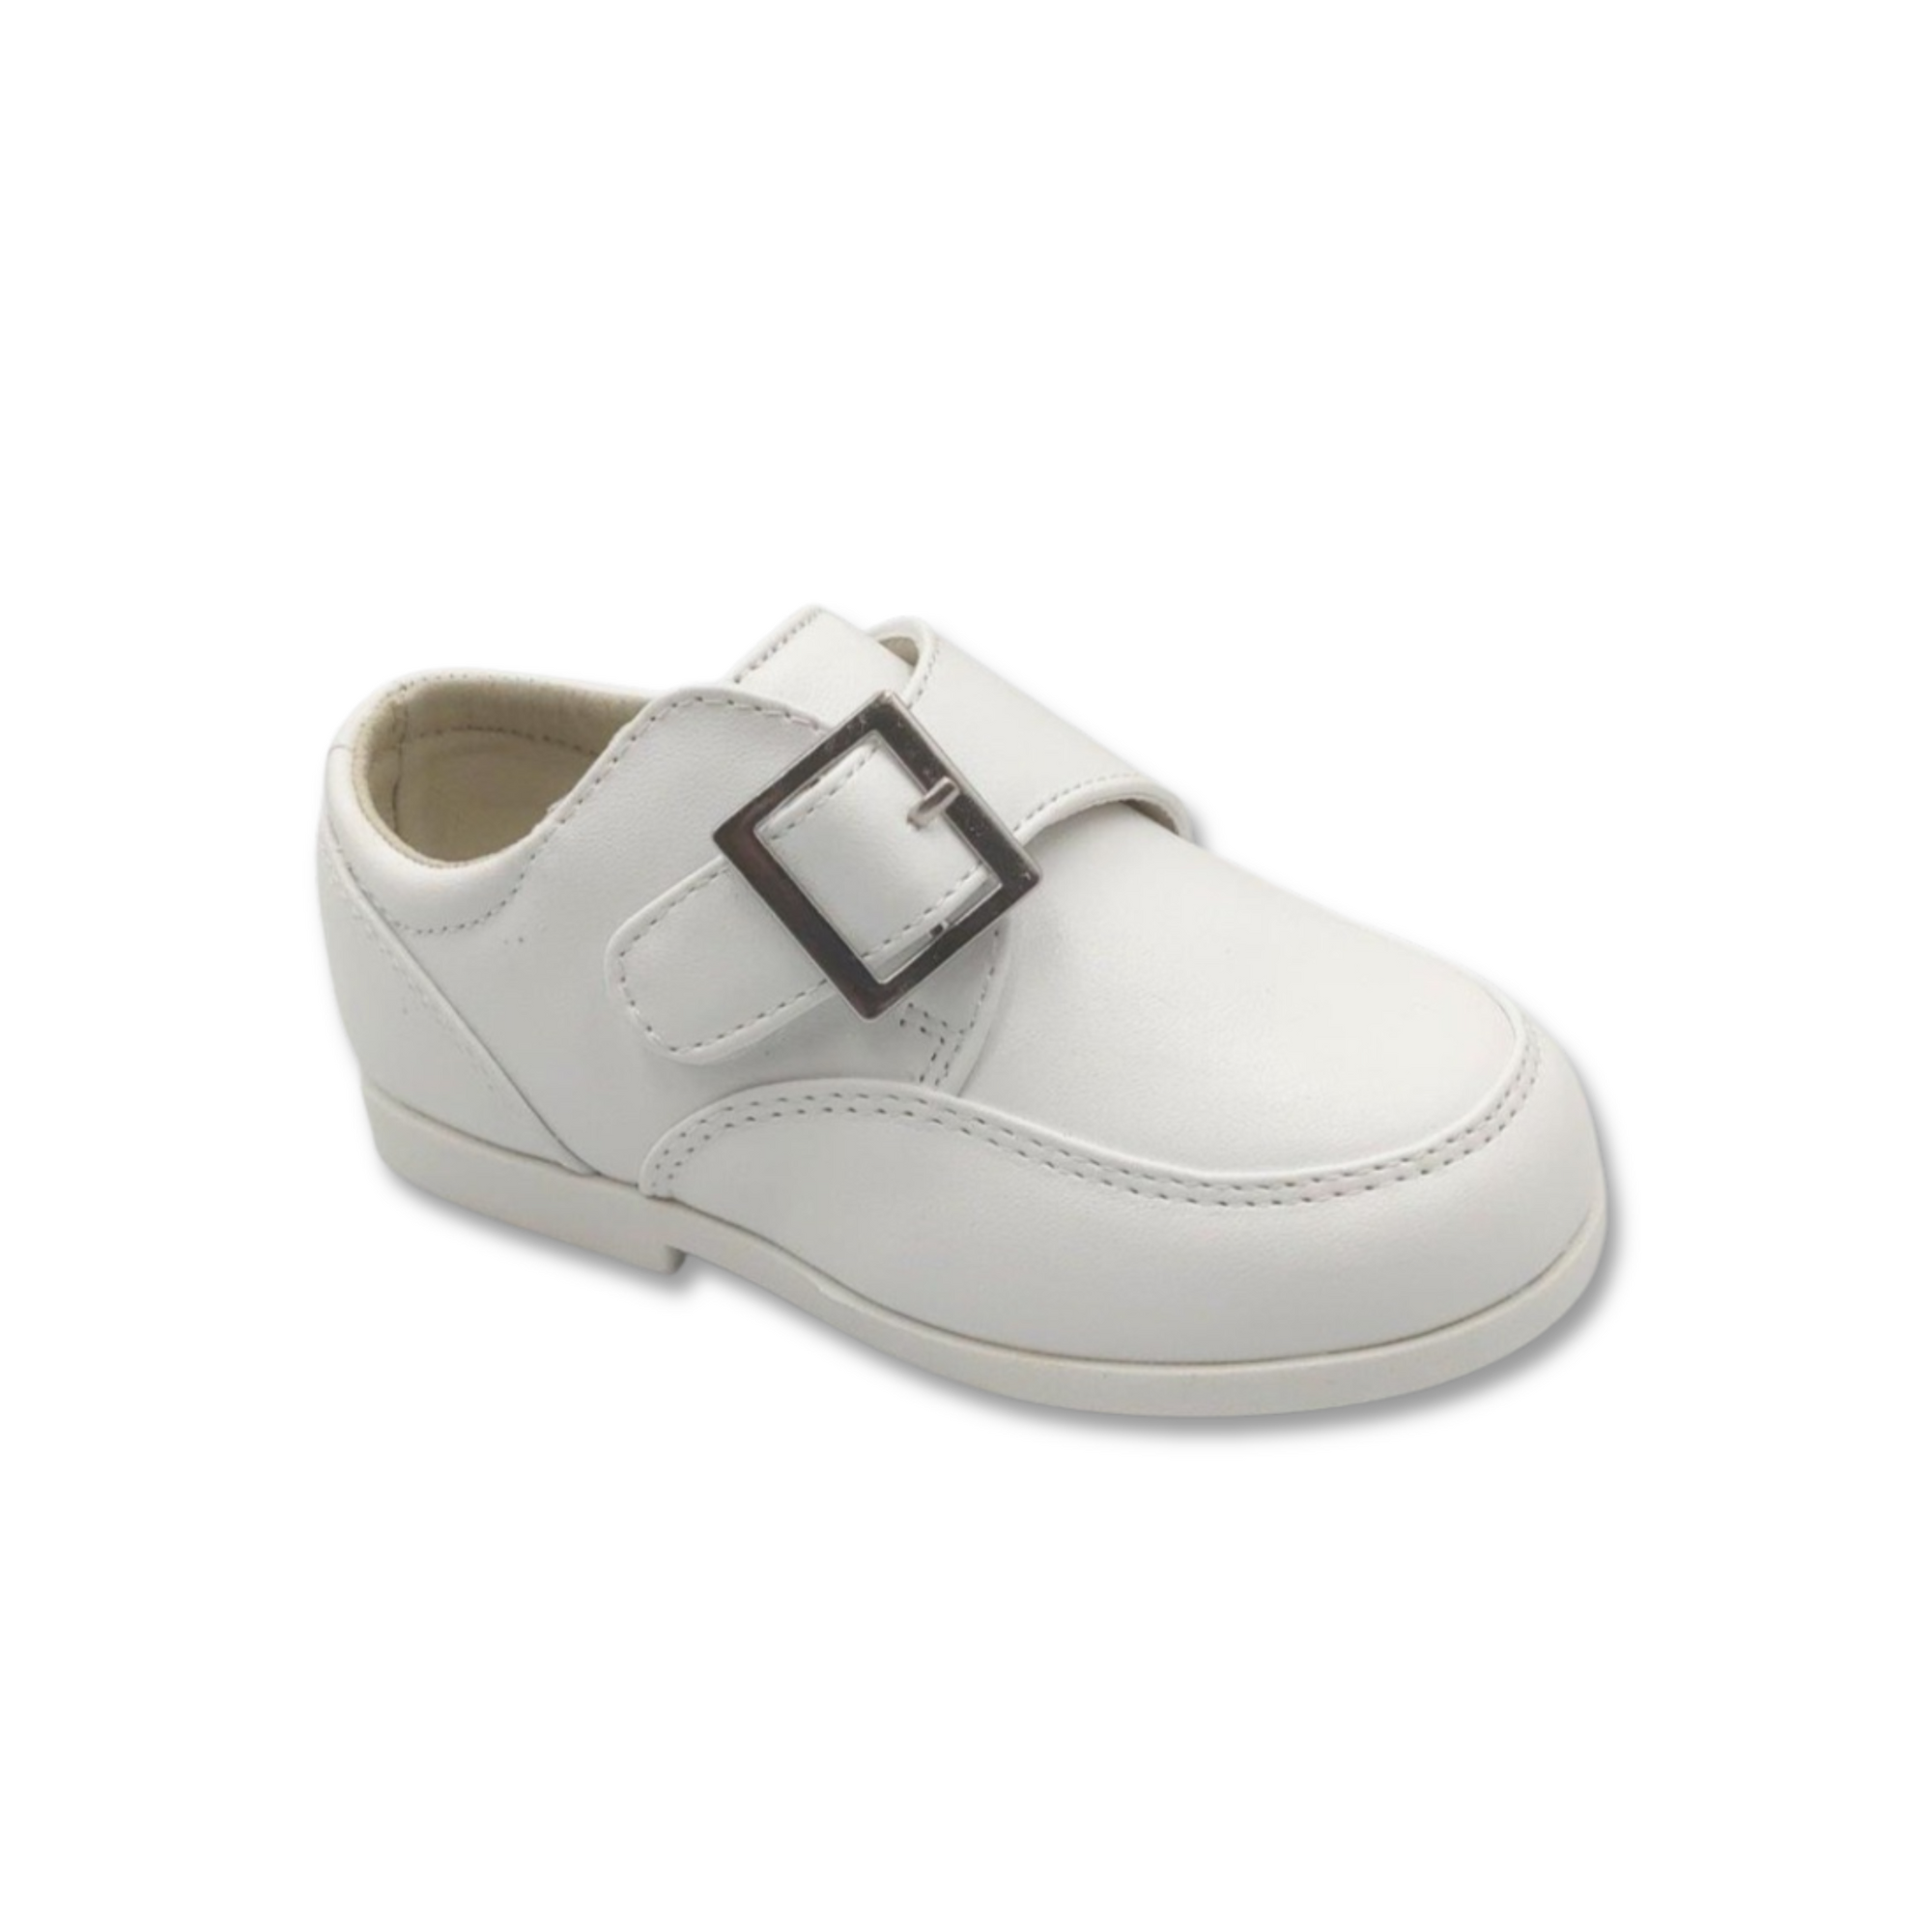 Baby Tom's Shoes